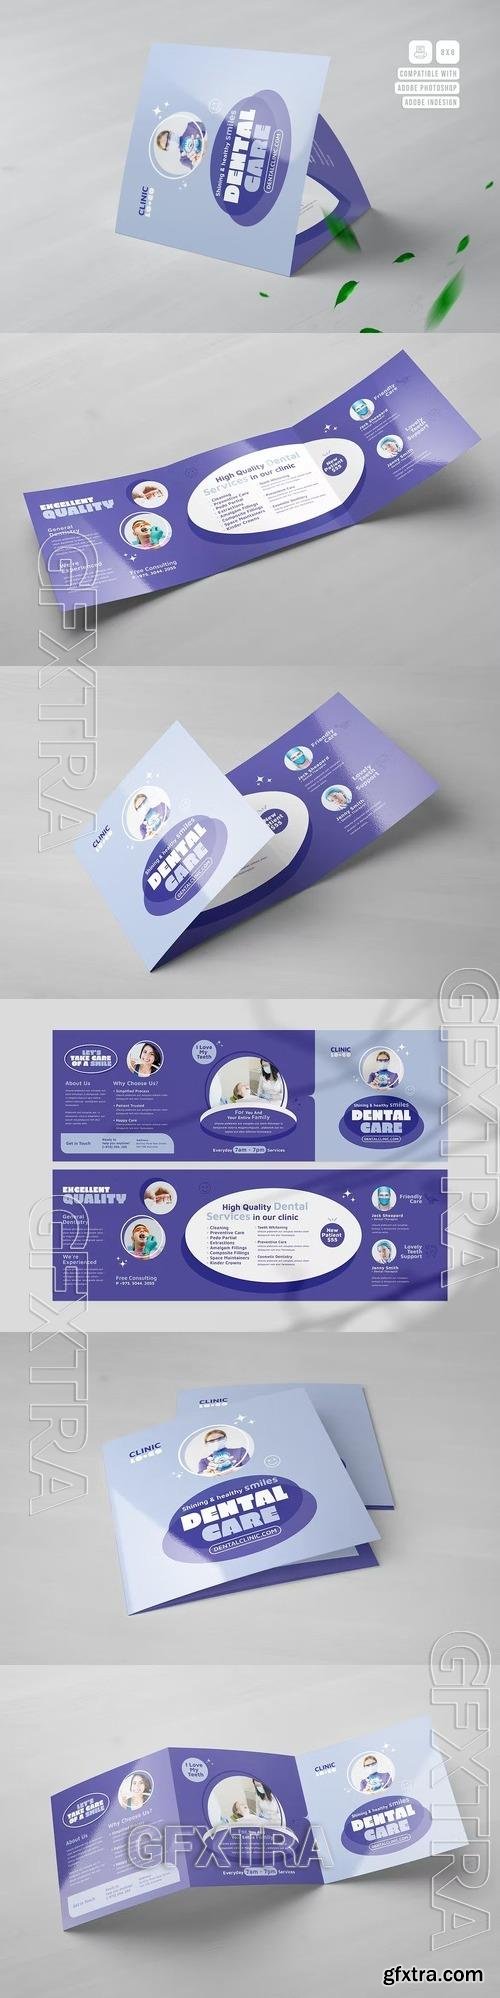 Dental Square Trifold Brochure 3WFWXCD